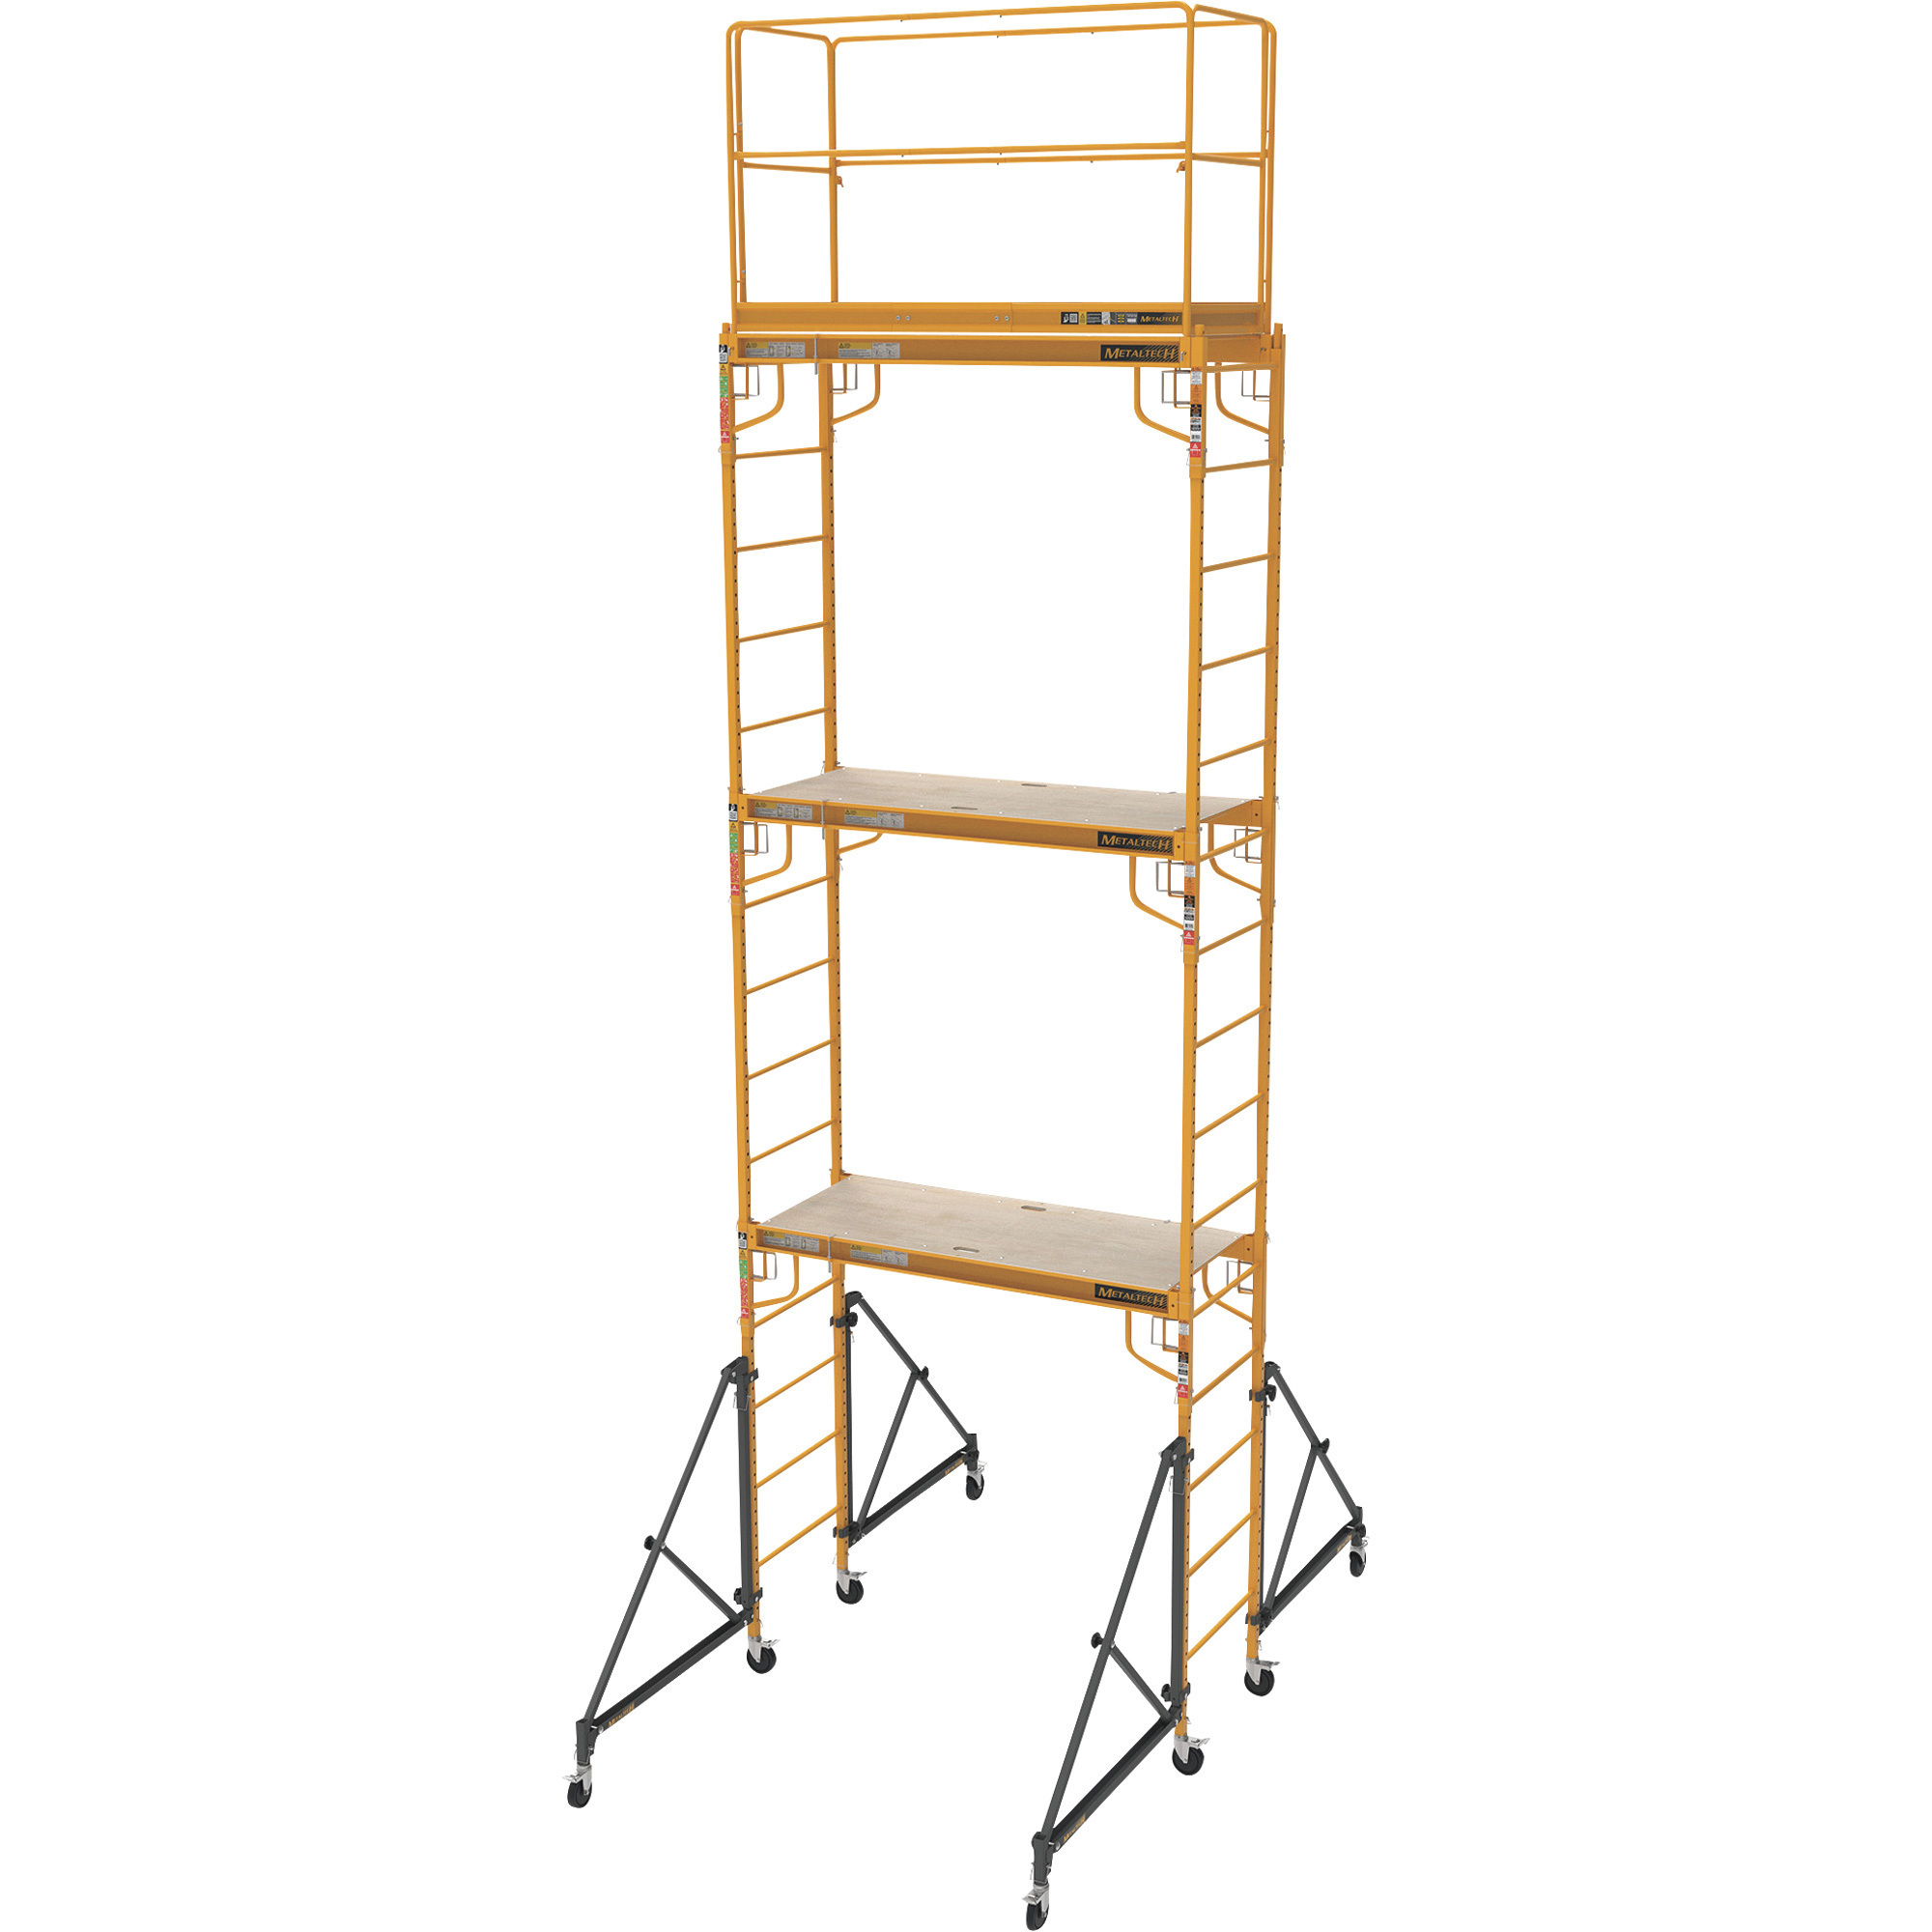 Metaltech Multipurpose 18ft. Maxi Square Triple Baker-Style Scaffold Tower Package, 733-Lb. Capacity, 73Inch W X 124Inch D X 241Inch H, Model I-T3CISC